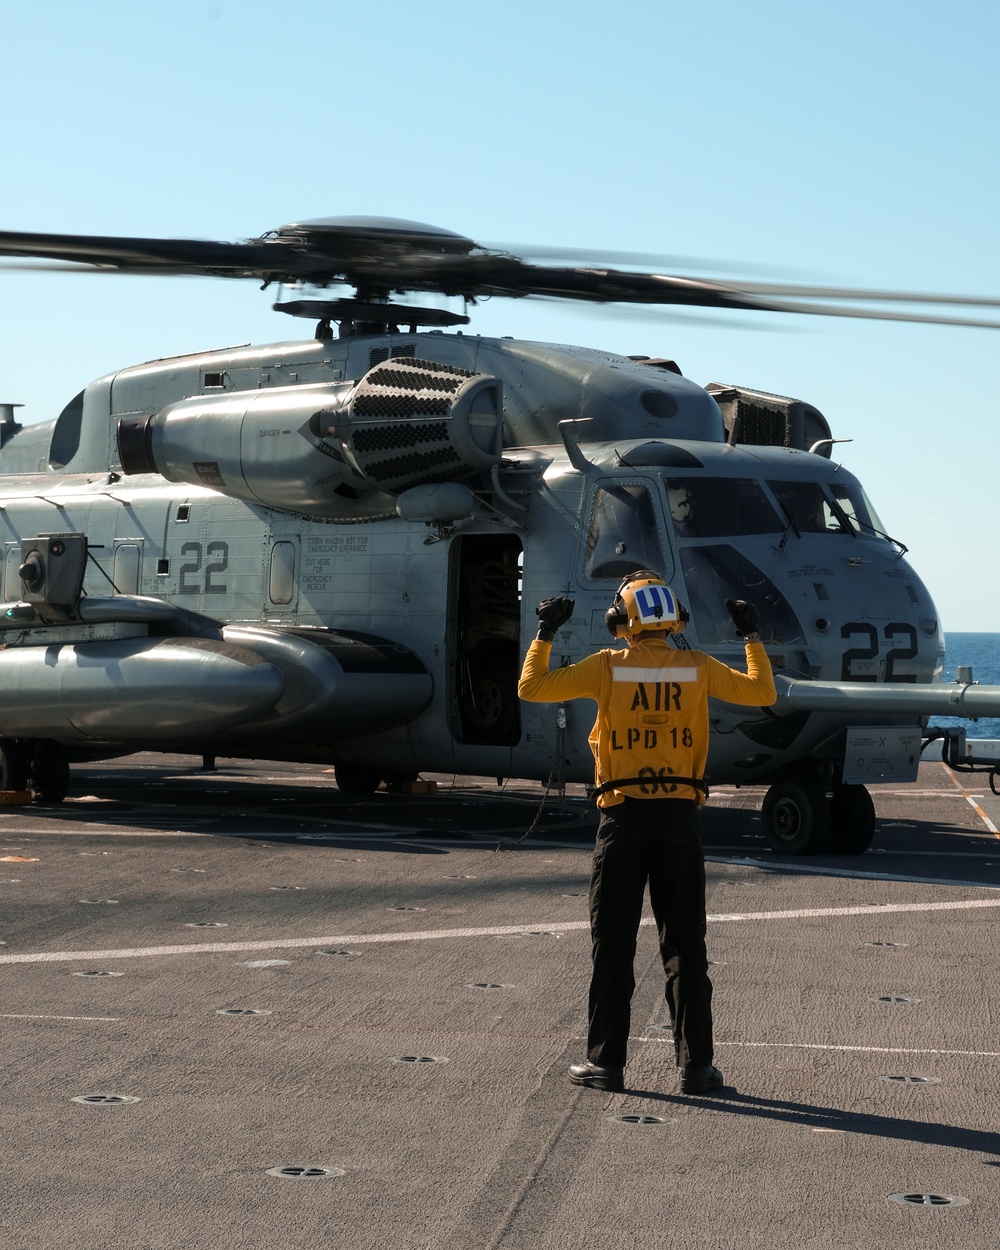 Flight Operations aboard the USS New Orleans during Talisman Sabre 23